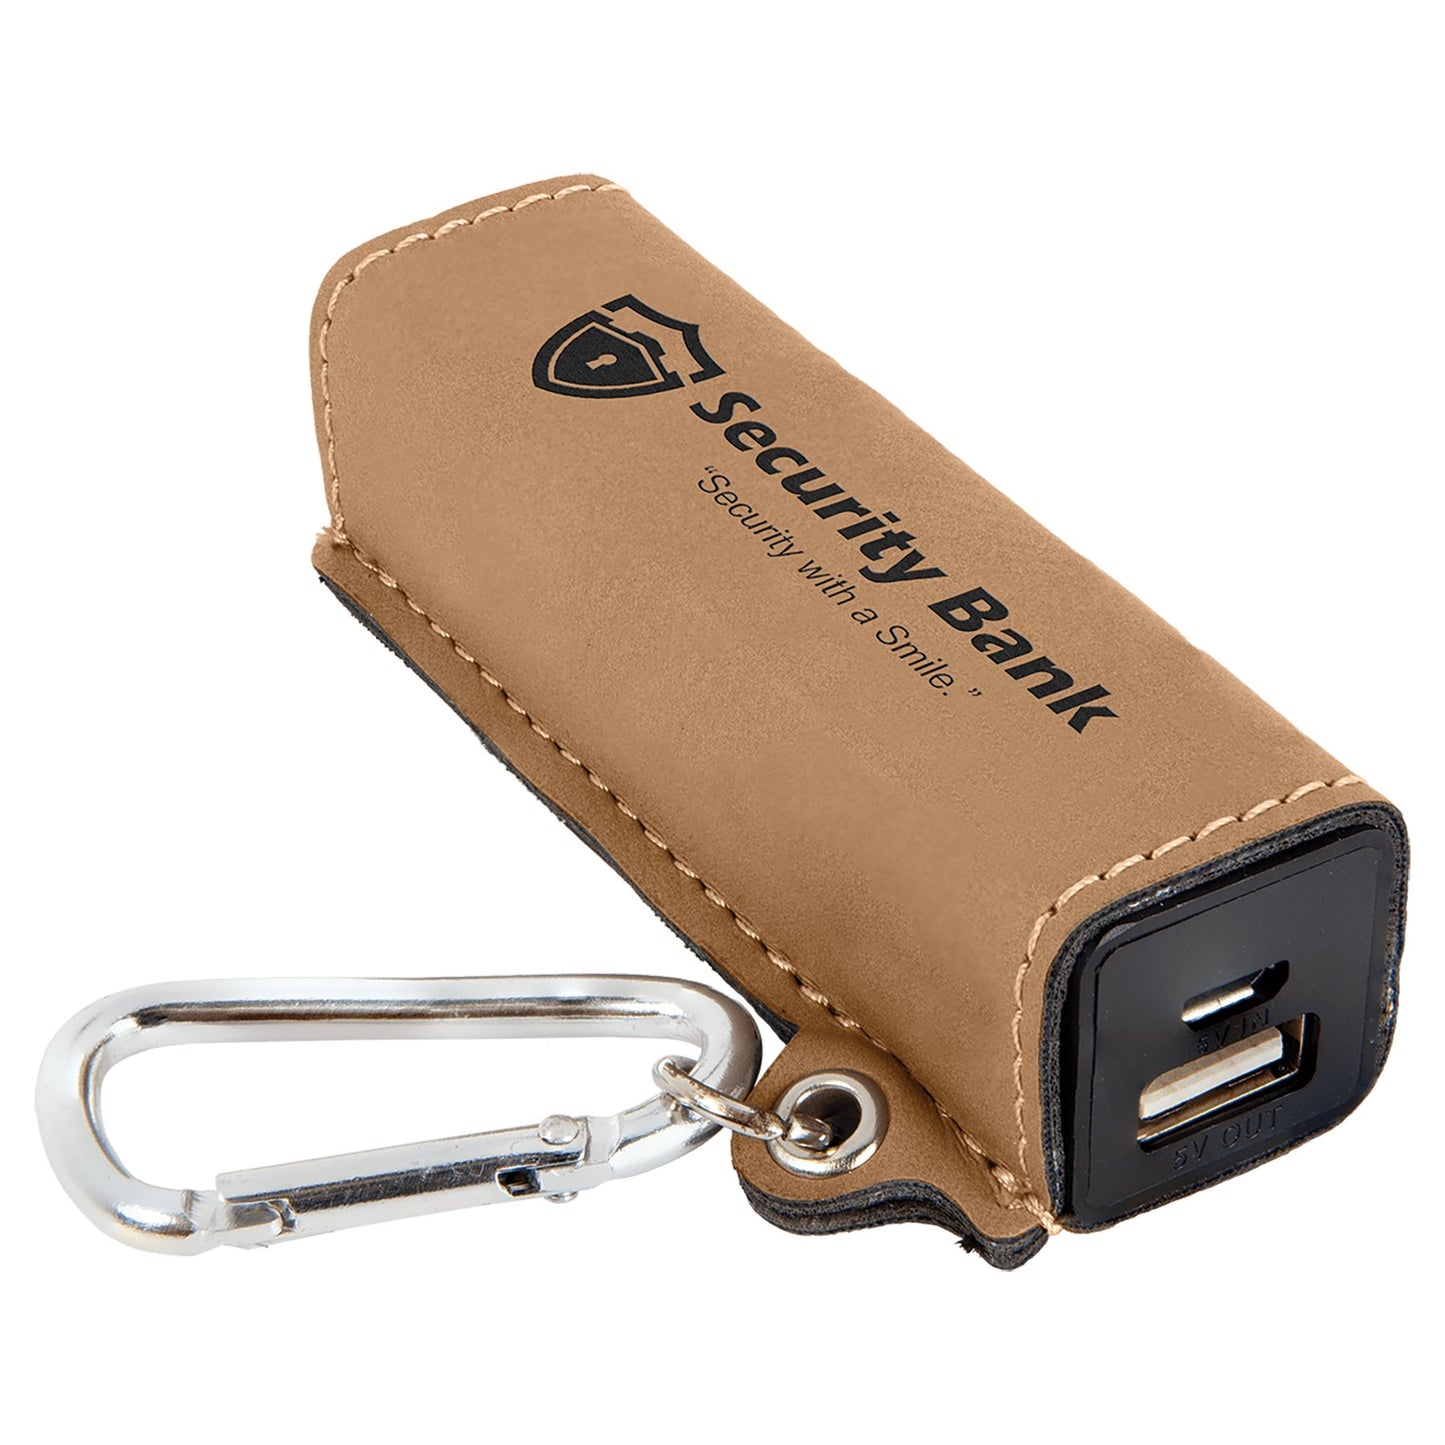 Laserable Leatherette 2200 mAh Power Bank with USB Cord - Legacy Creator IncLight Brown